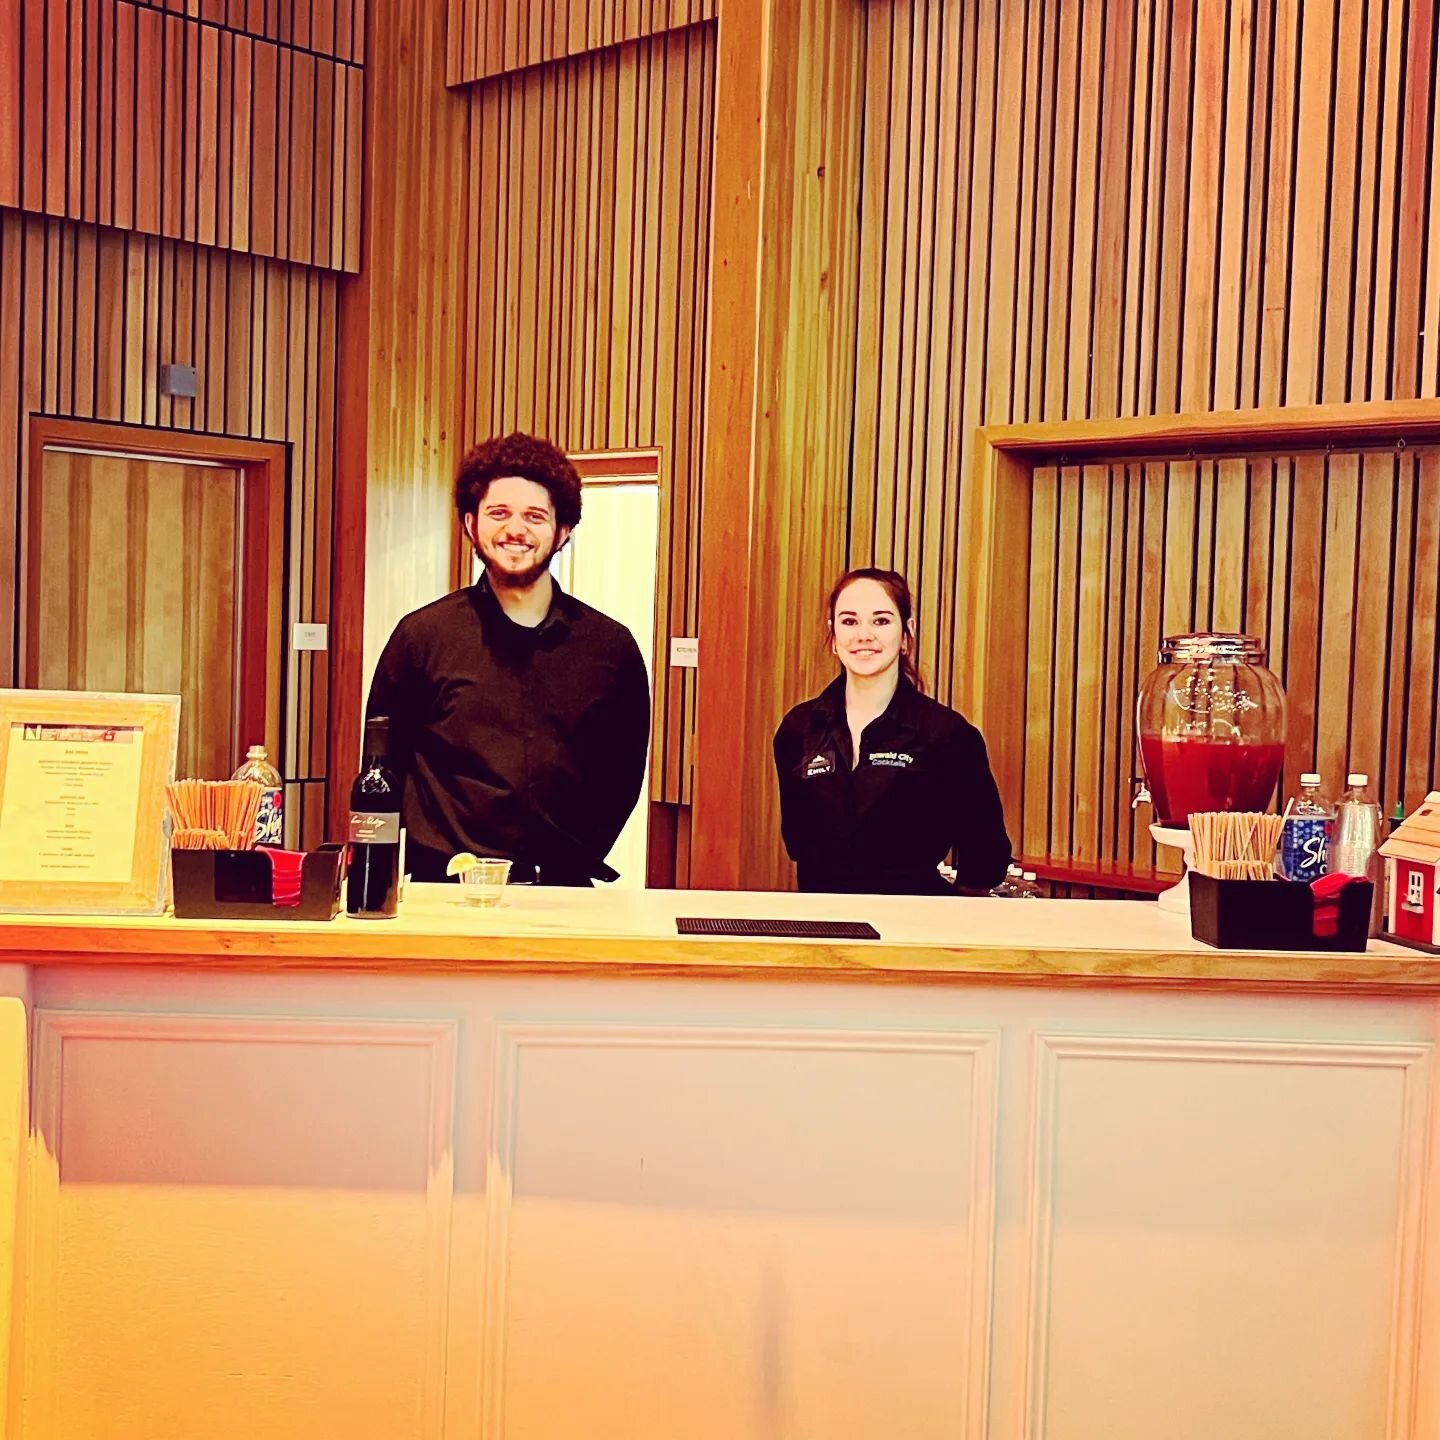 When @nordicmuseum booked us, we said Nor-way! Our bartender @emilylefebre and new hire Justice whipped up Strawberry Rhubarb Aquavit Sours (no Sweedener added)  for guests at the National Nordic Museum in Seattle last night.